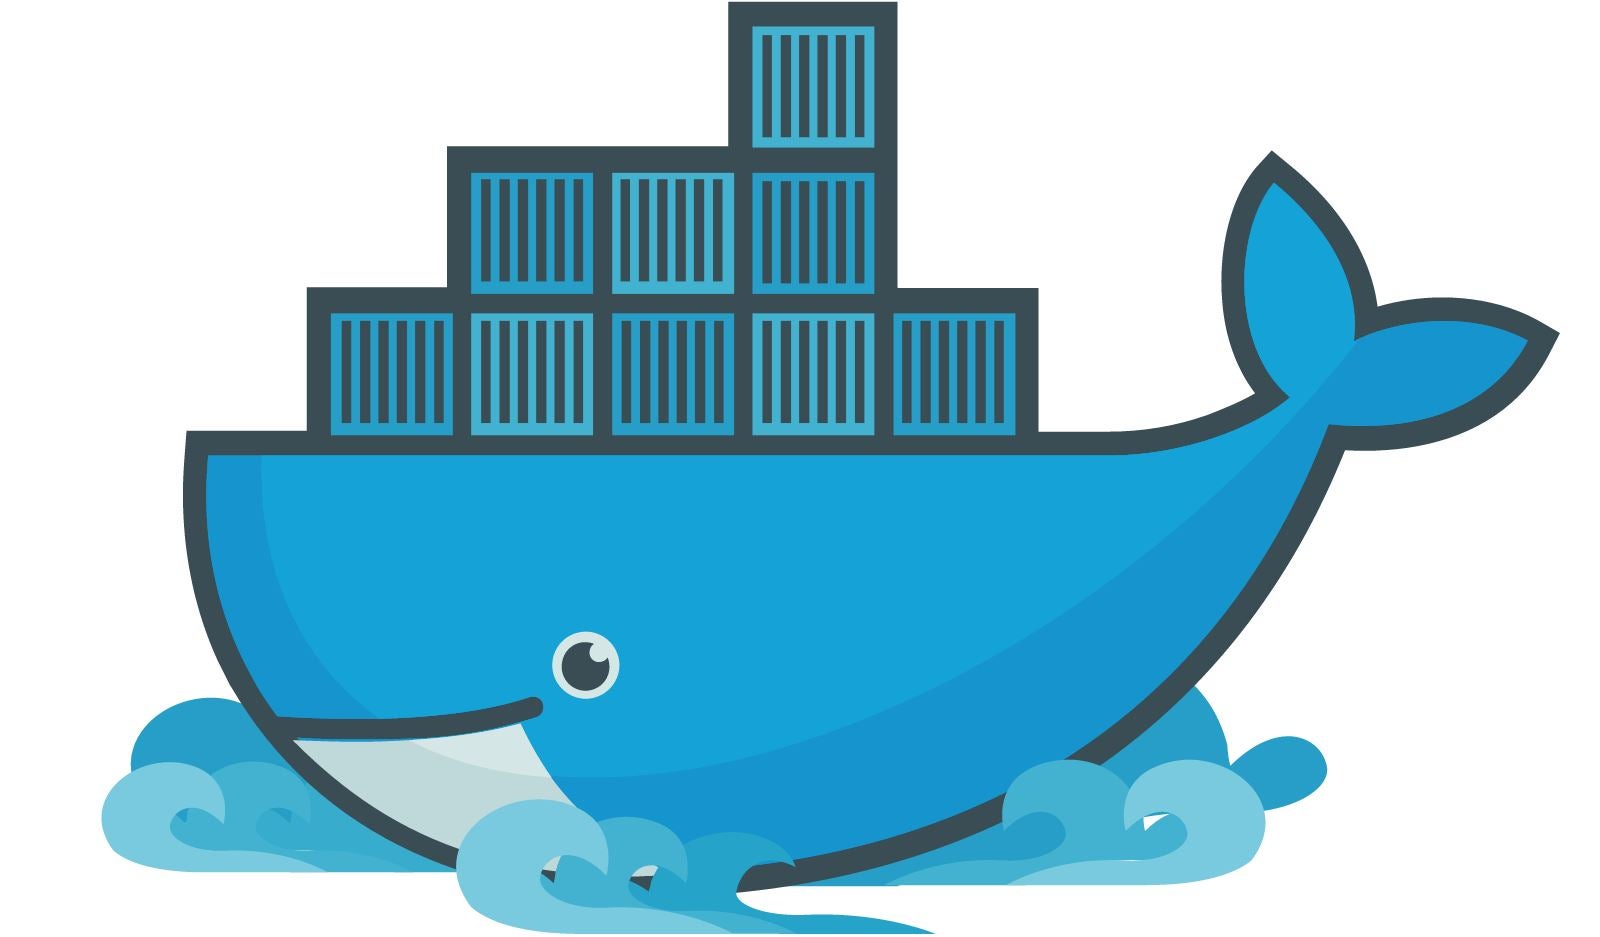 With Windows Server Support to End, Docker Launches Migration Tool